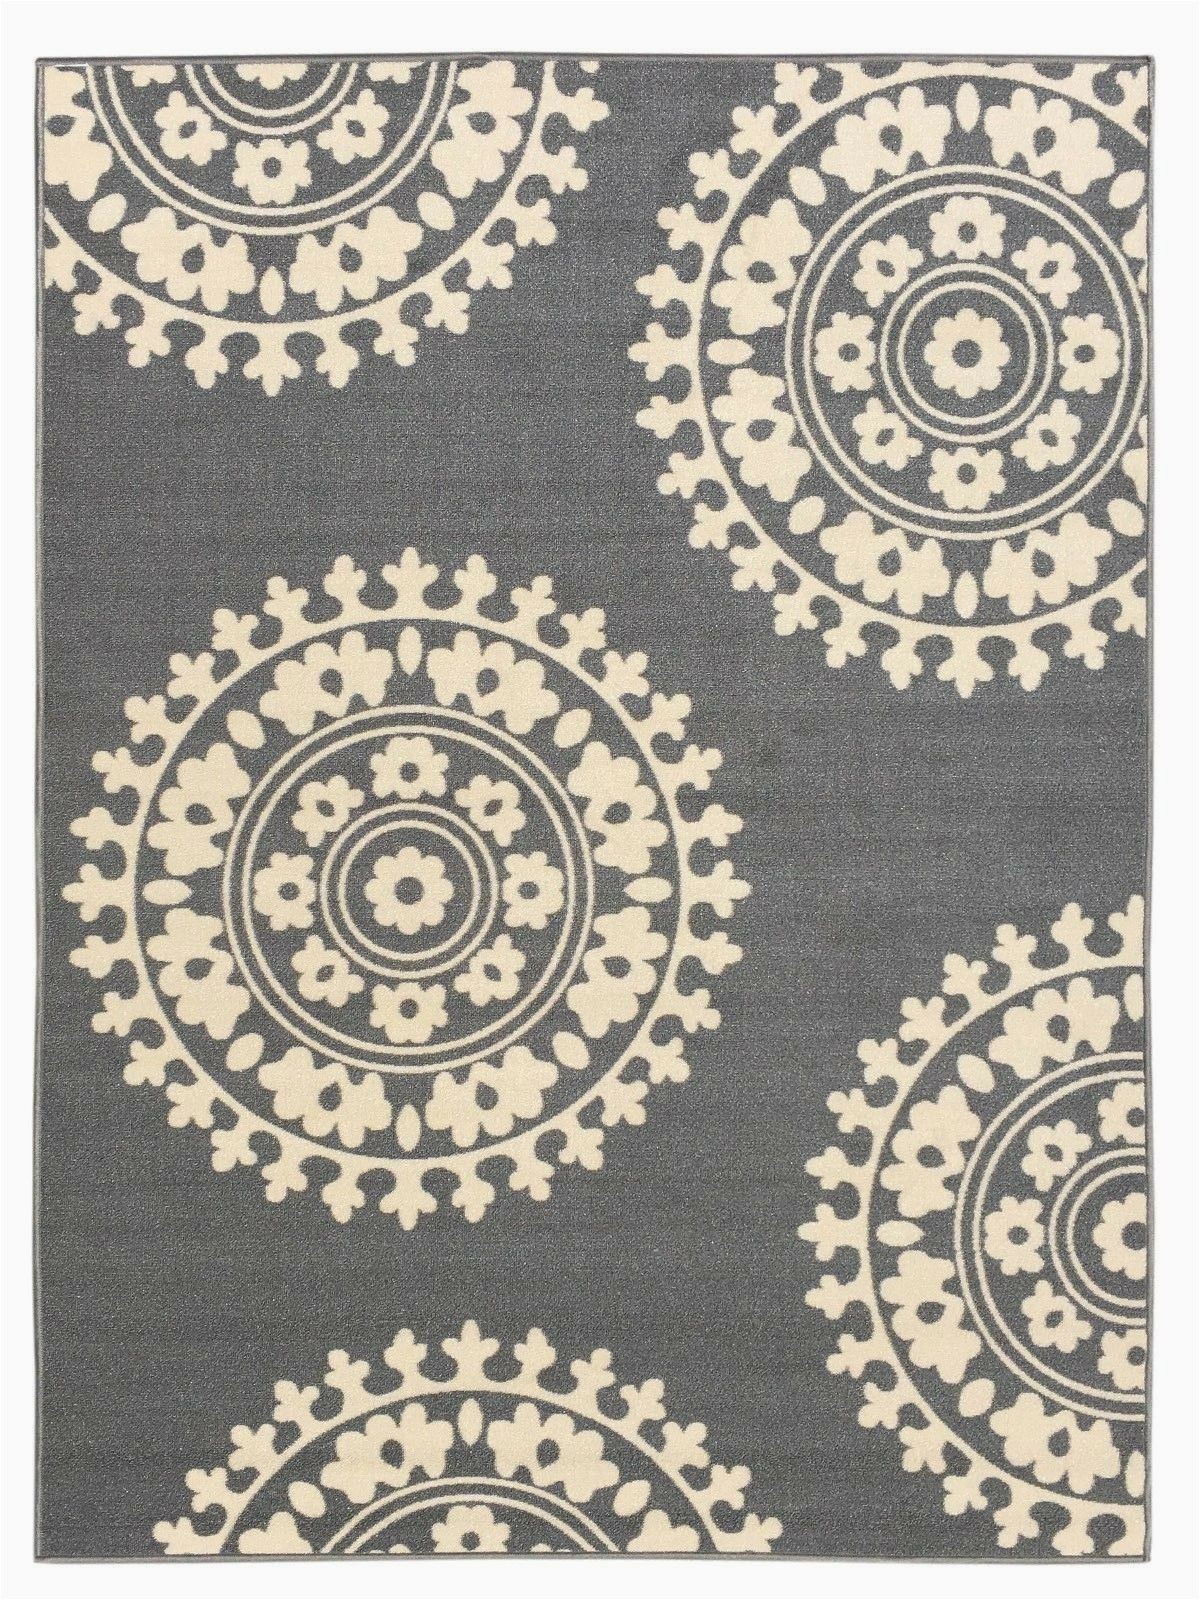 Rubber Backed area Rugs 5×7 Rubber Backed Non Skid Non Slip Gray Ivory Color Medallion Design area Rug